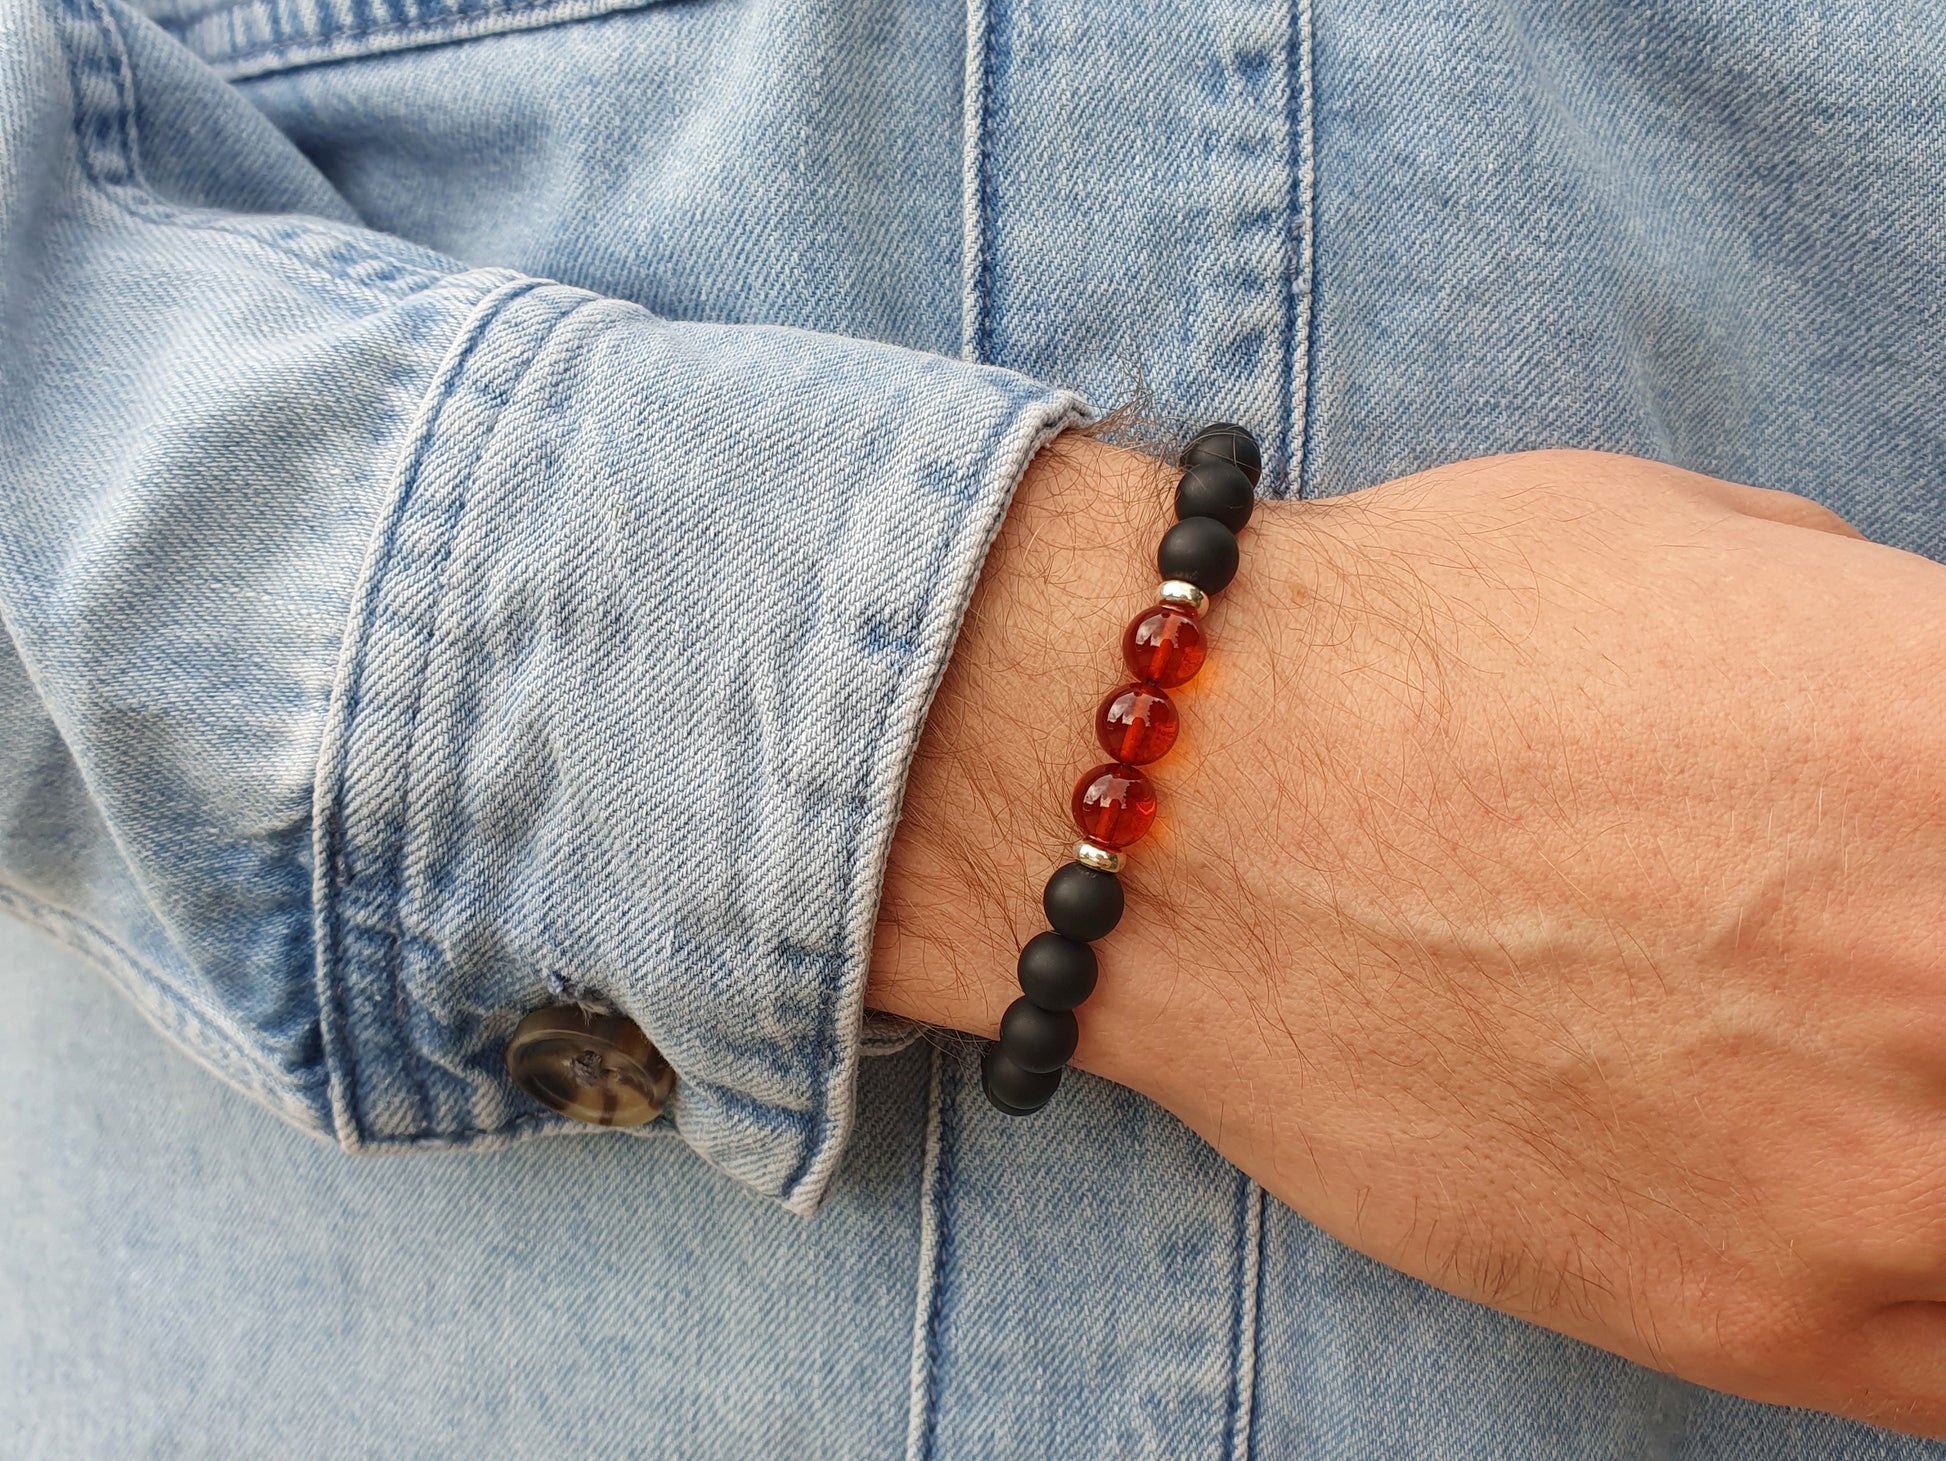 Men minimalist jewelry for daily wear with Baltic amber stones